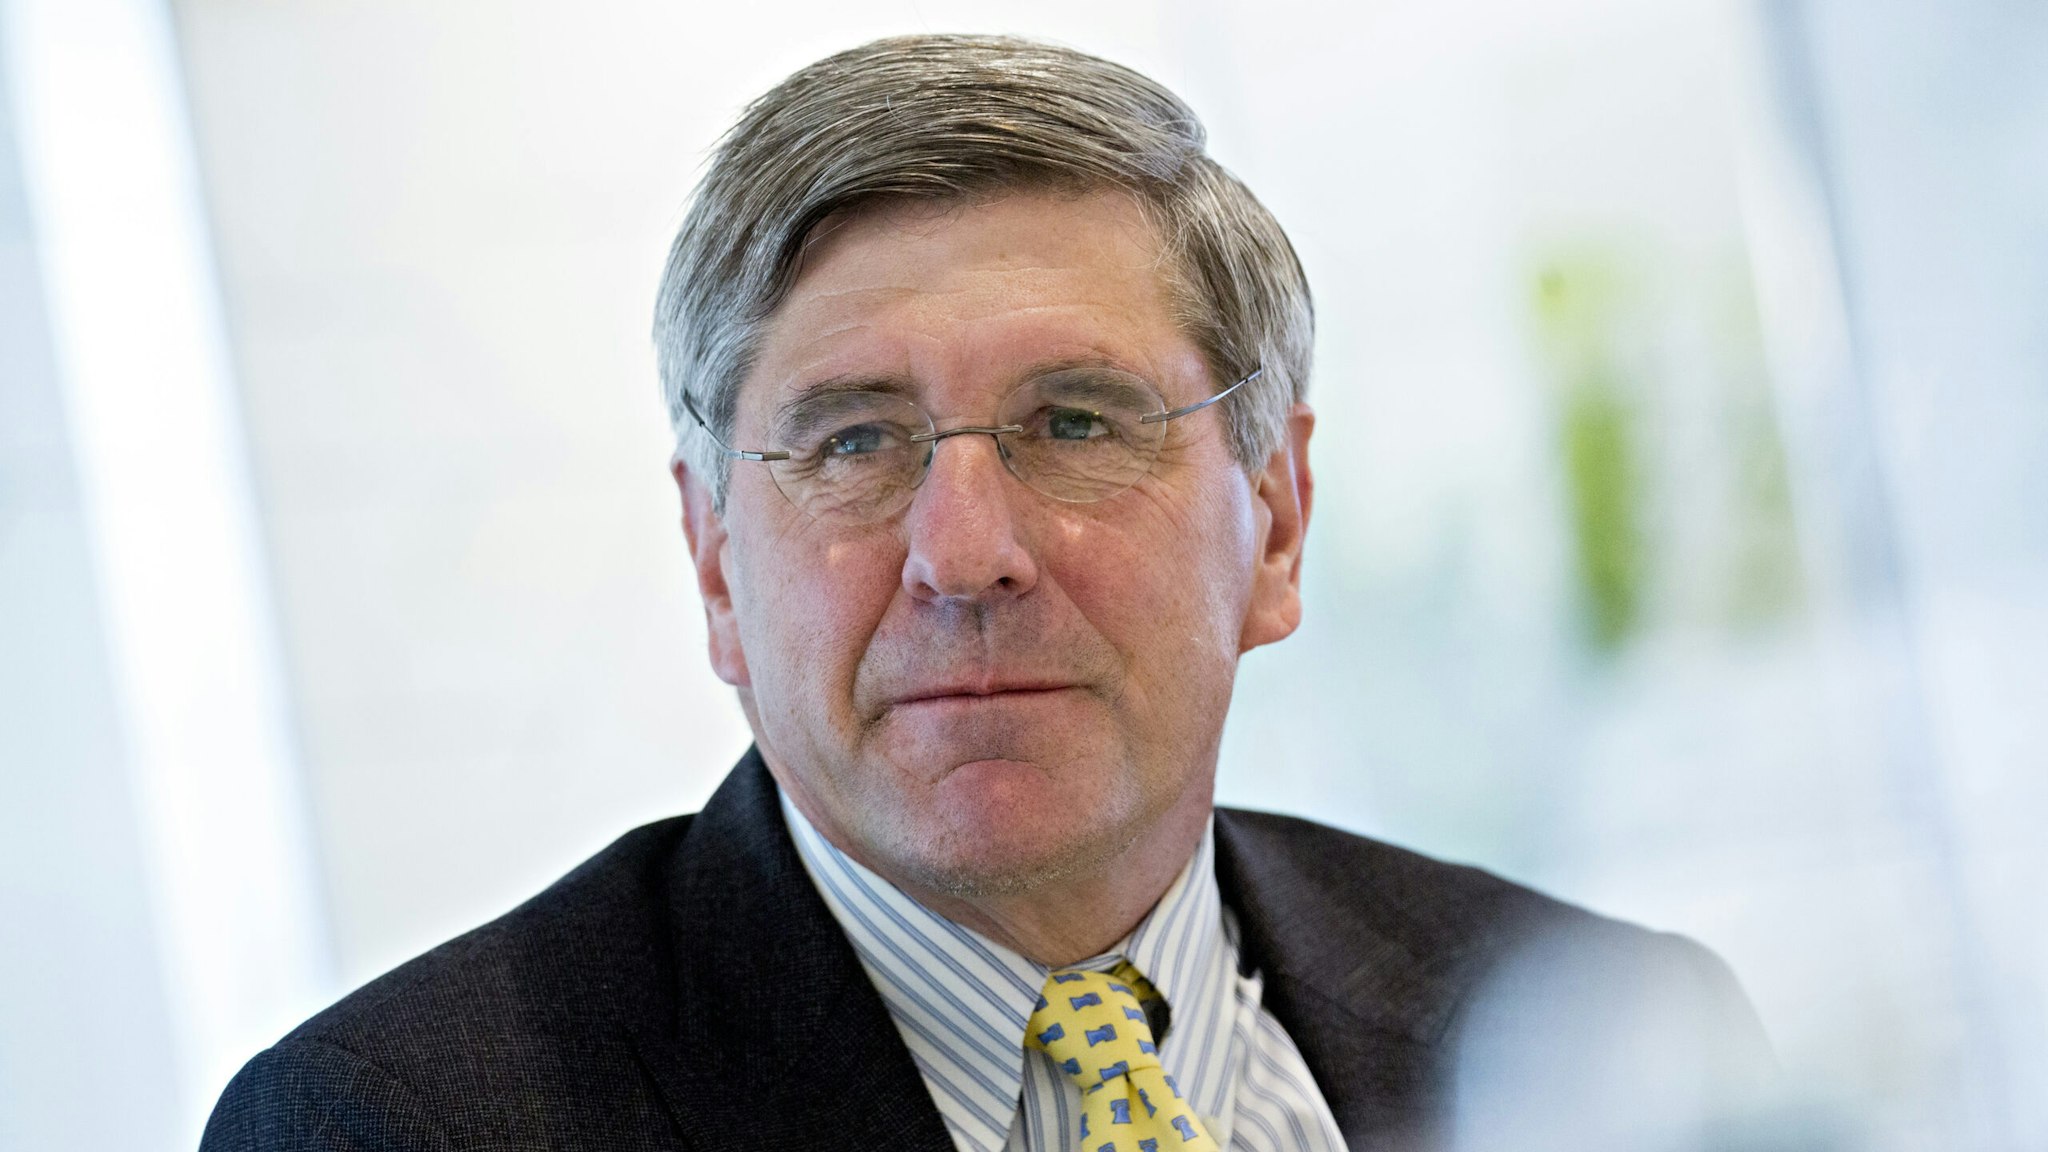 Stephen Moore, visiting fellow at the Heritage Foundation, listens during an interview in Washington, D.C., U.S., on Thursday, May 2, 2019. President Donald Trump's selection for the Federal Reserve Board of Governors, Stephen Moore, said he is "all in" for the central bank despite growing objections to his potential nomination among Senate Republicans.